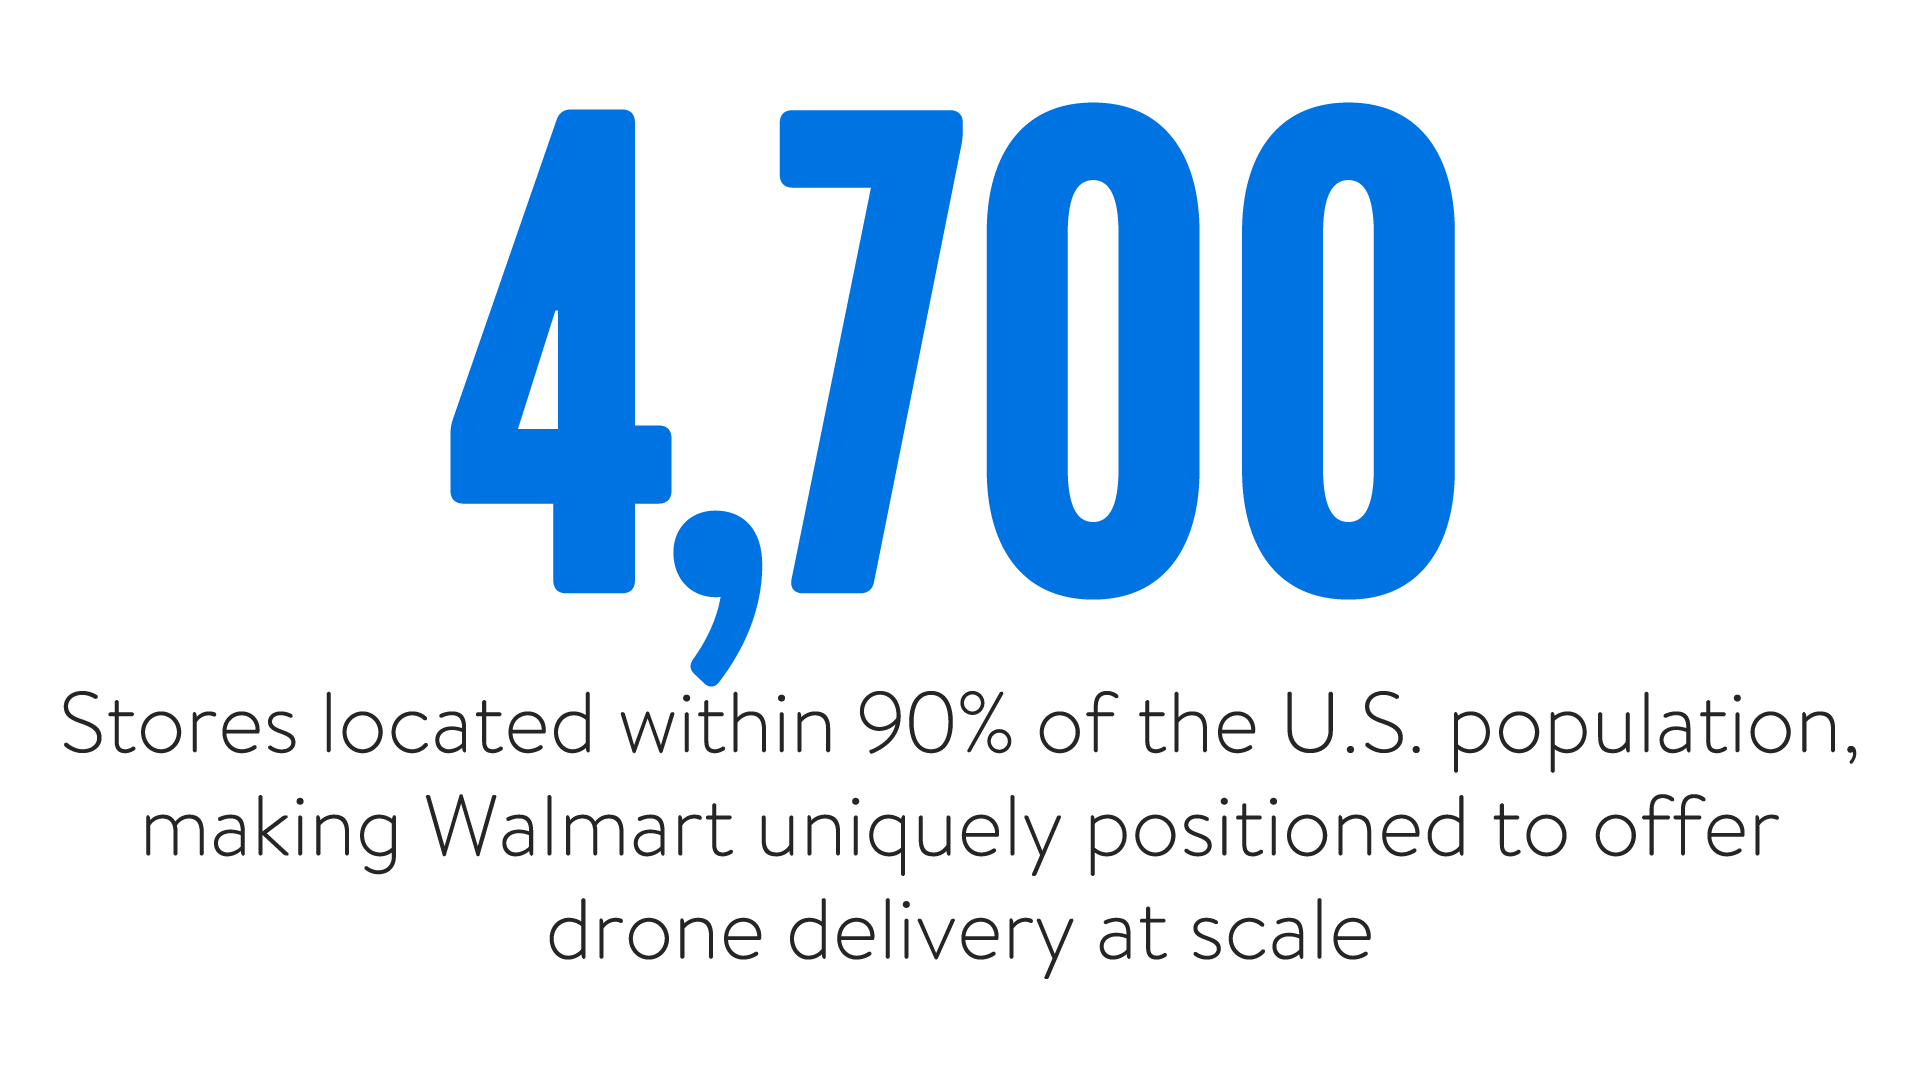 4,700 Stores located within 90% of the U.S. population, making Walmart uniquely positioned to offer drone delivery at scale